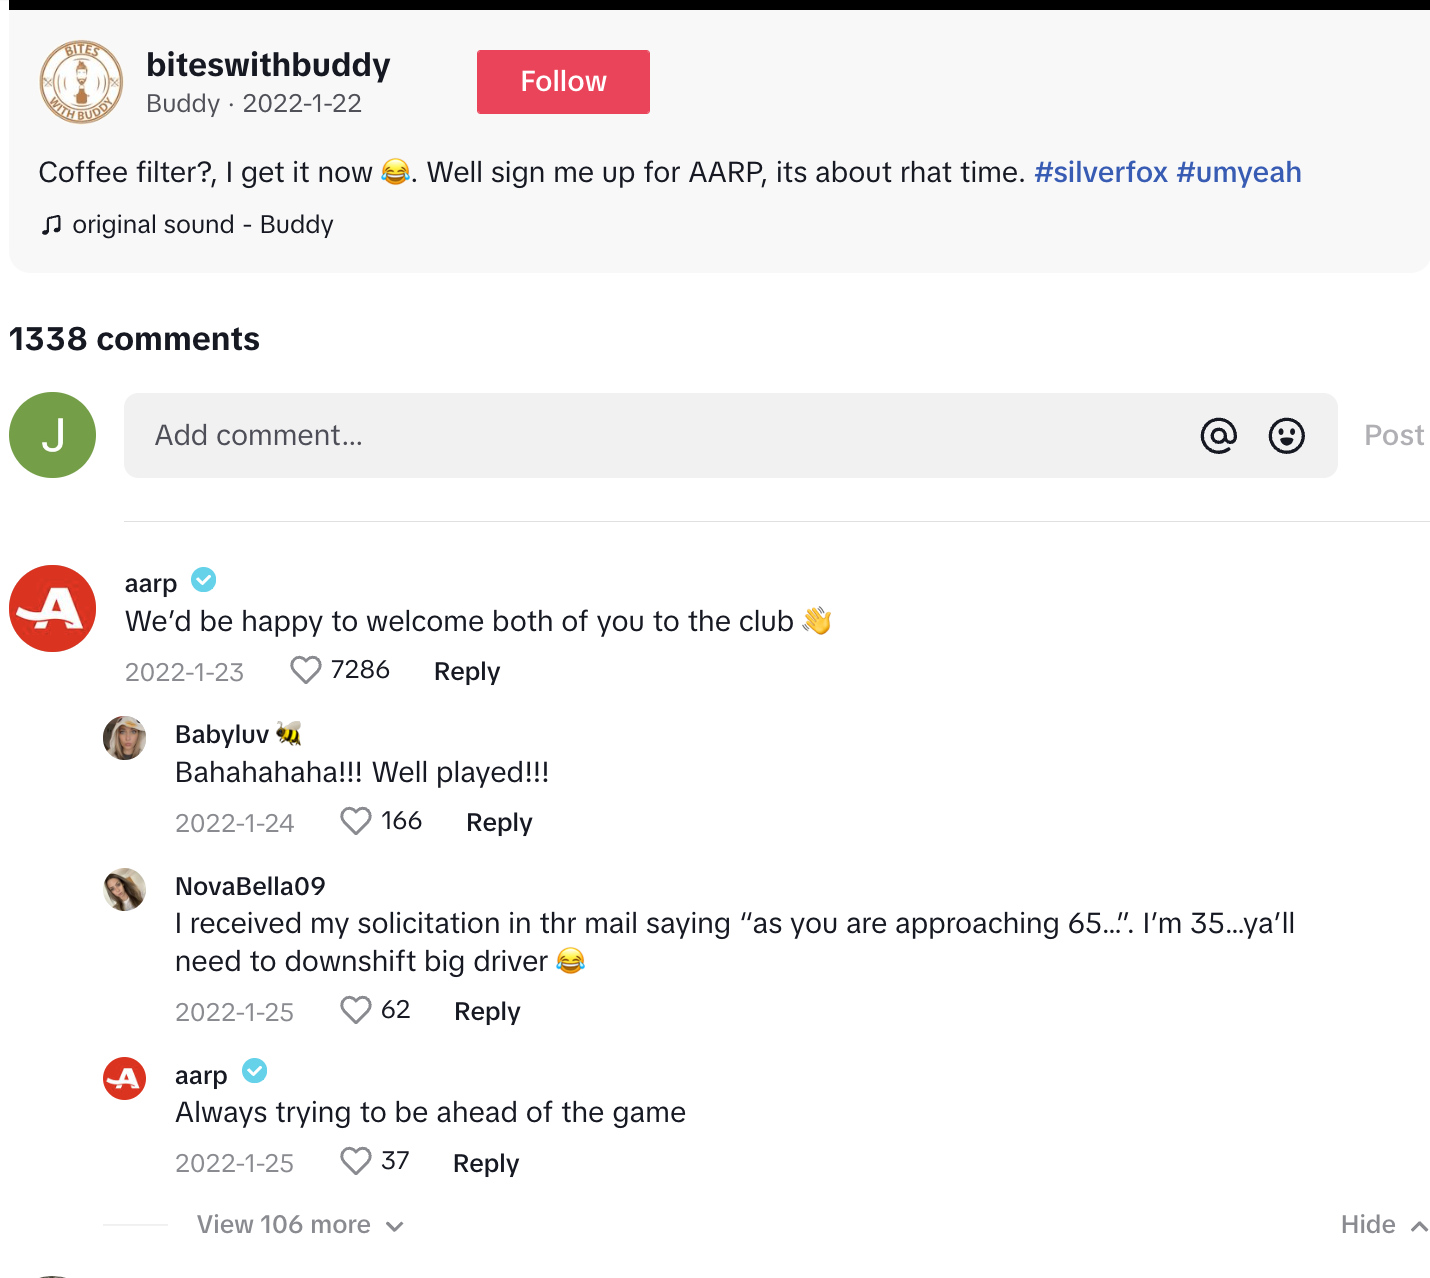 An AARP response in the TikTok comment section to a tagged about a creator signing up for a membership. The comment says, "We'd be happy to welcome both of you to the club." Several users interact with this comment with positive sentiments.